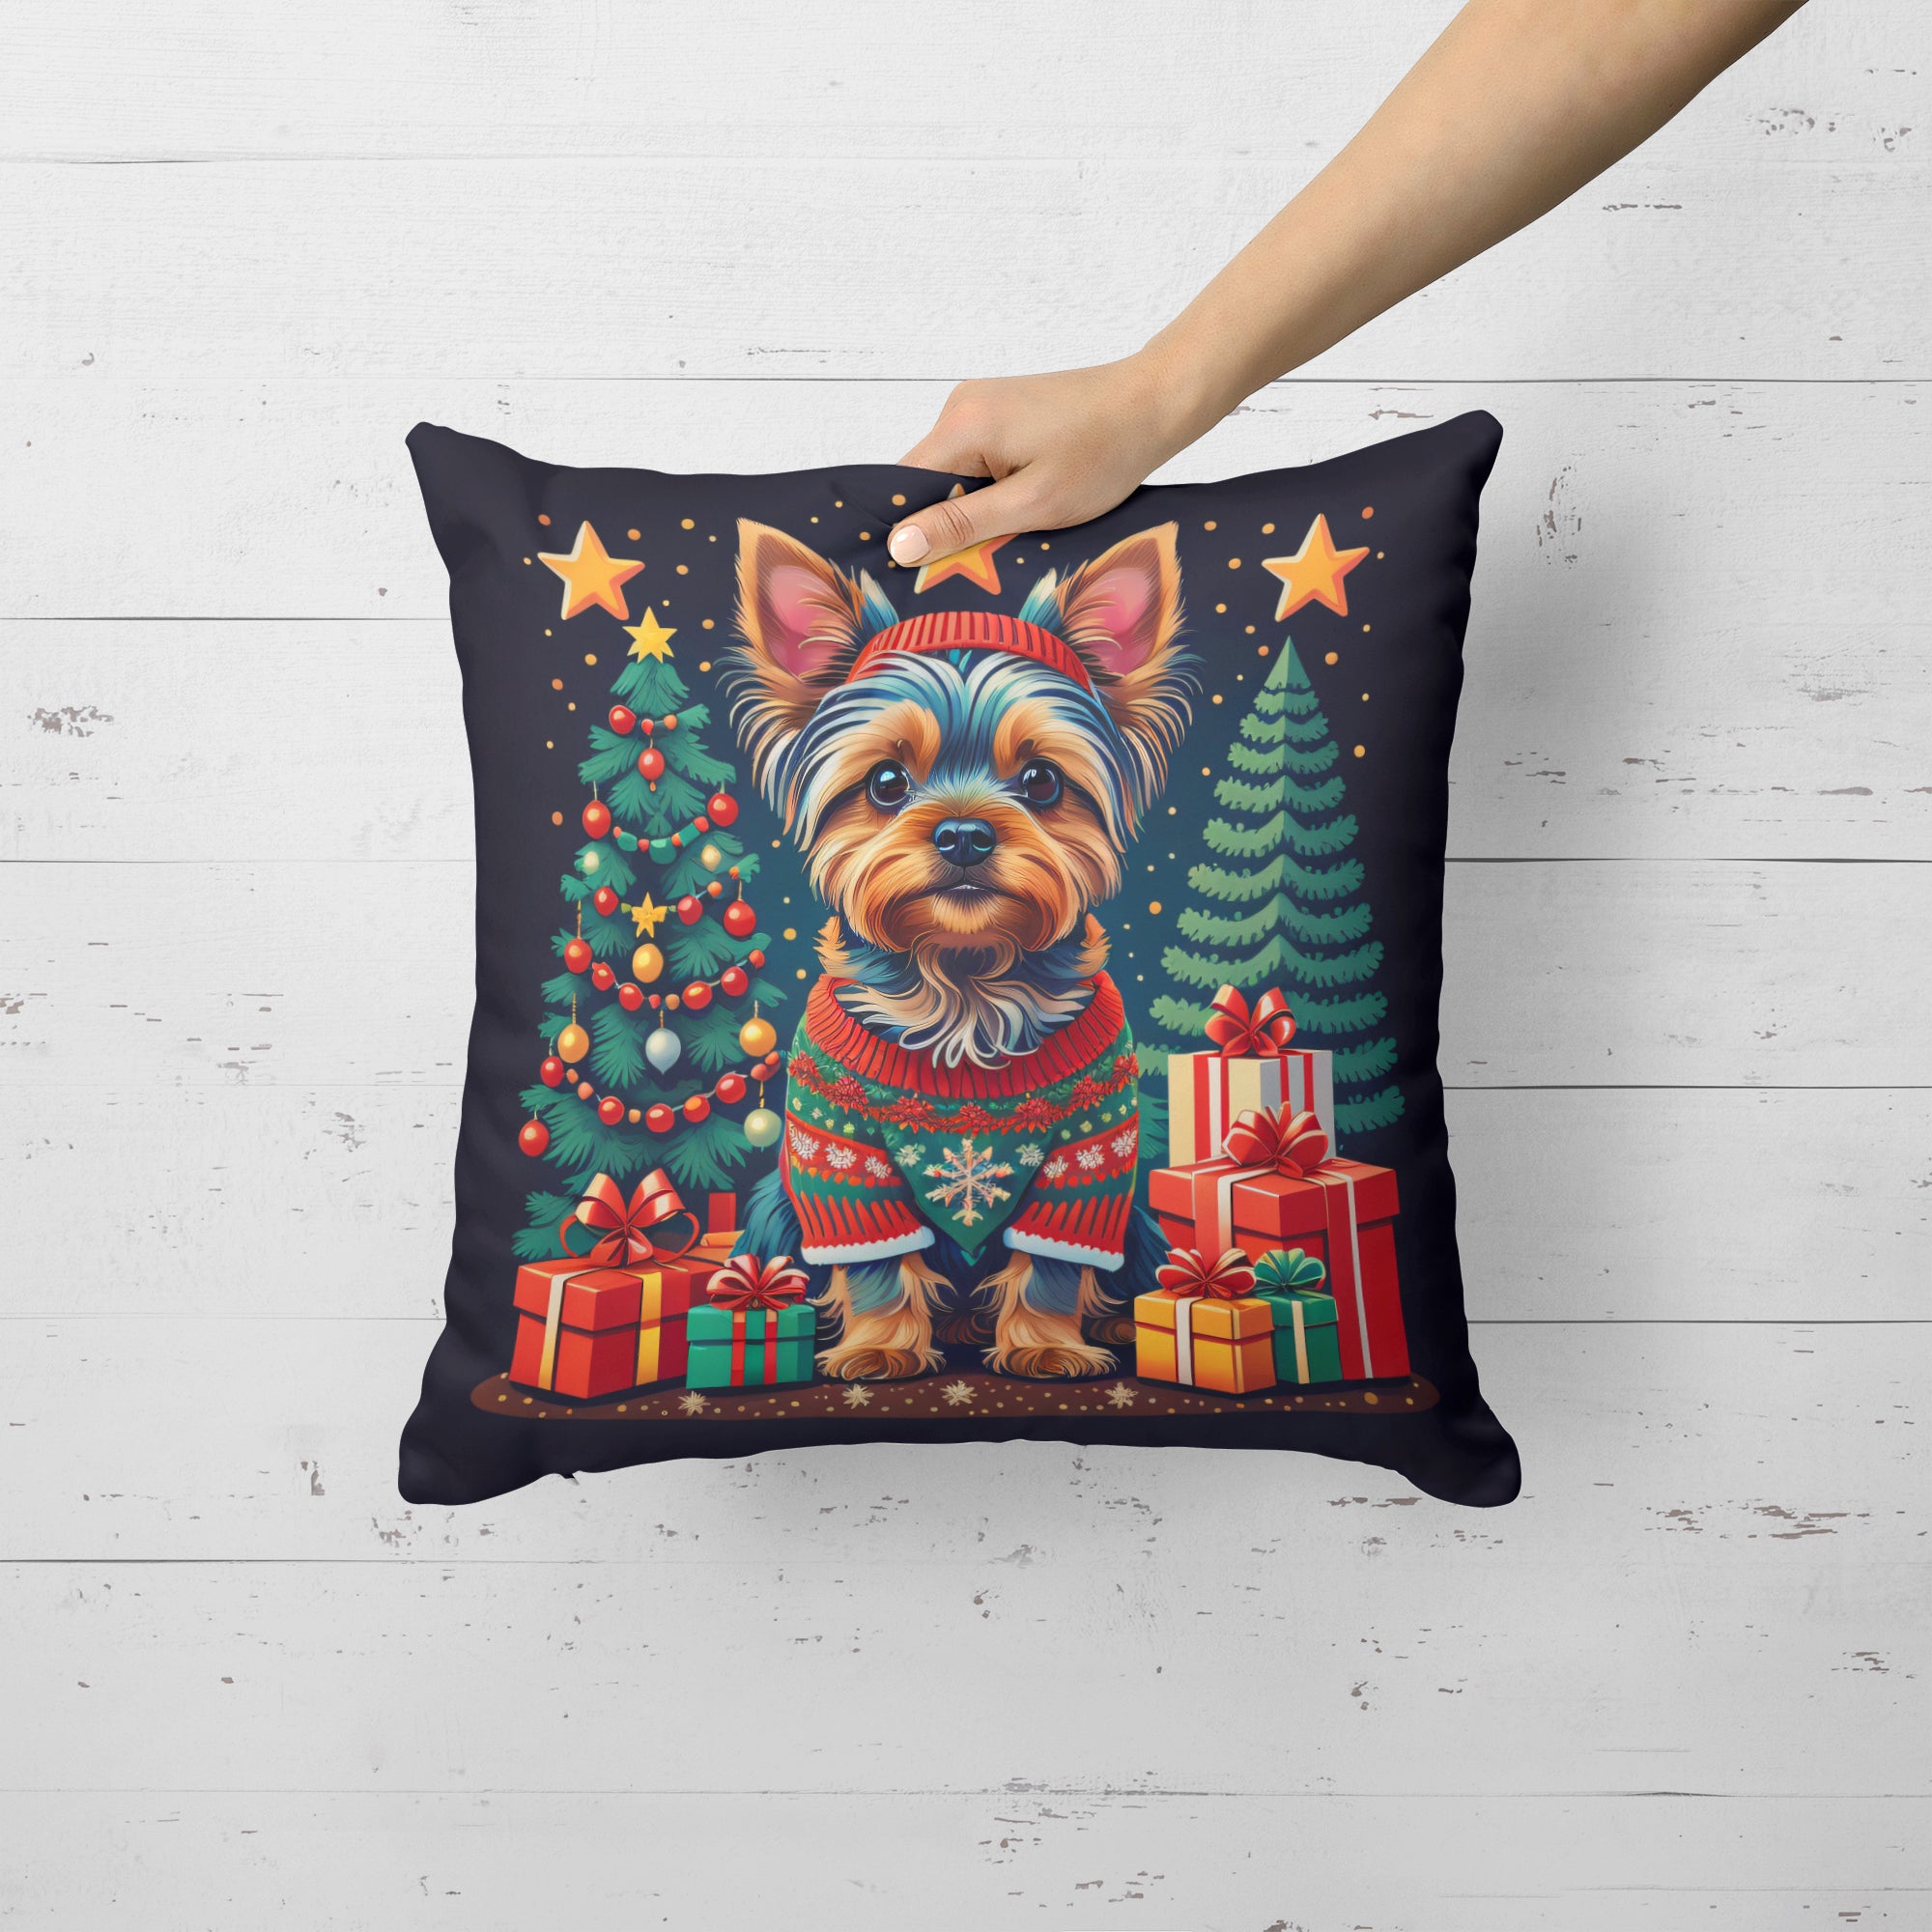 Buy this Yorkie Yorkshire Terrier Christmas Fabric Decorative Pillow